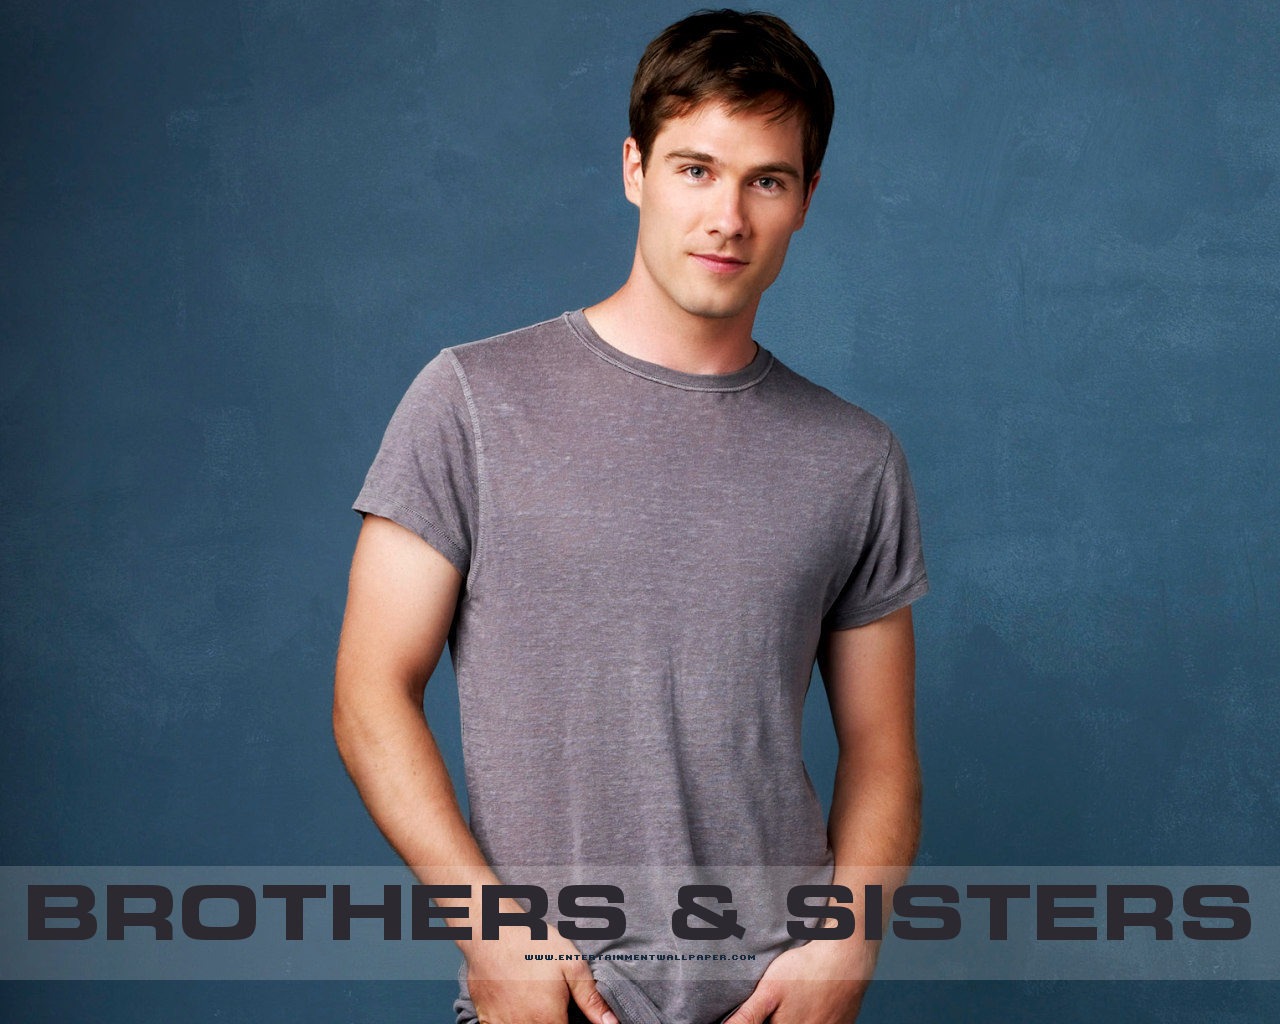 Brothers & Sisters 兄弟姐妹 #20 - 1280x1024